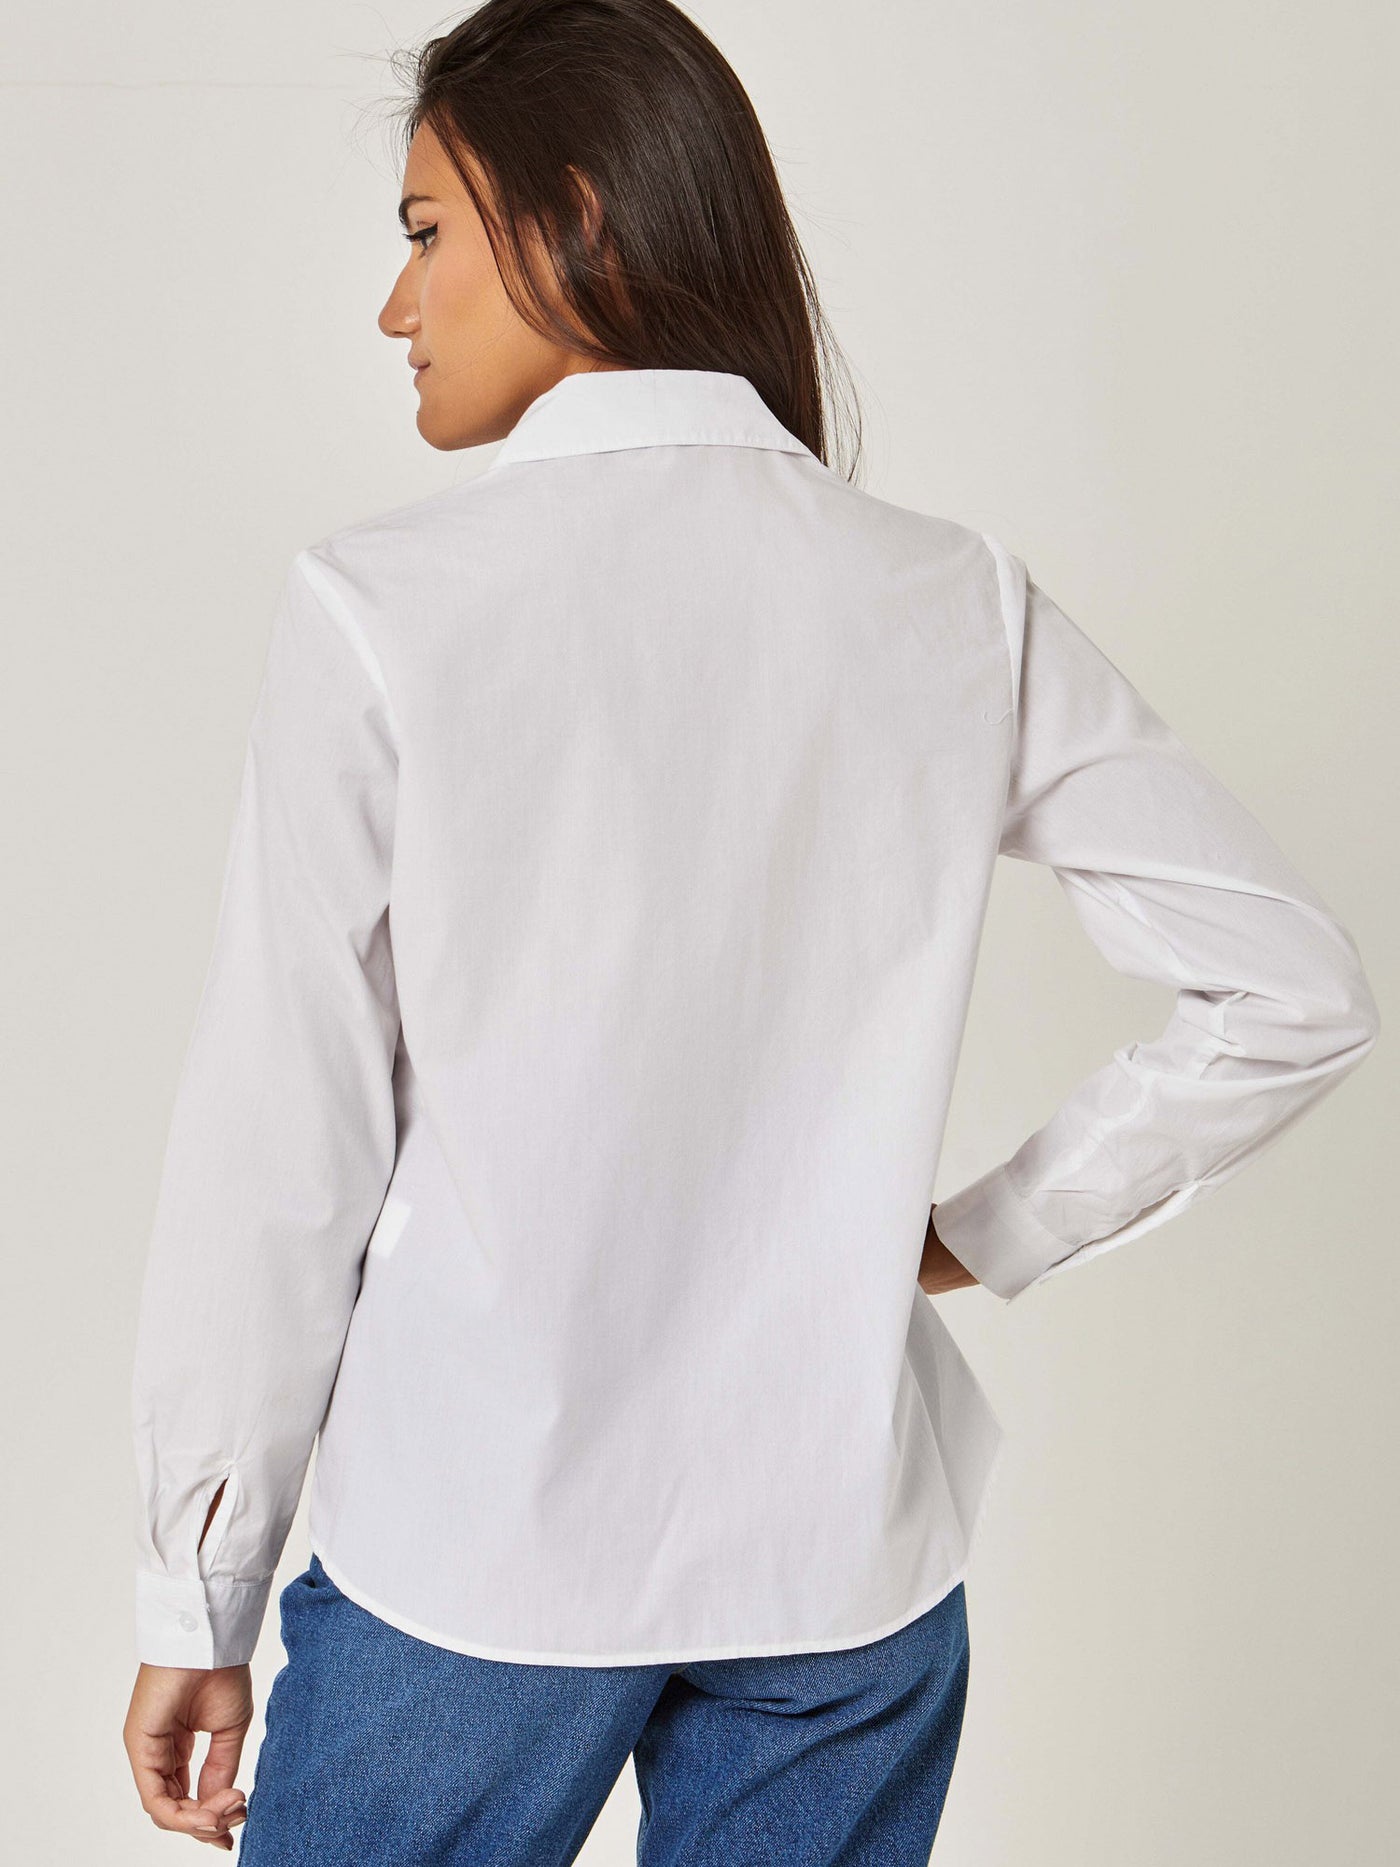 Shirt - Solid - Full Sleeves